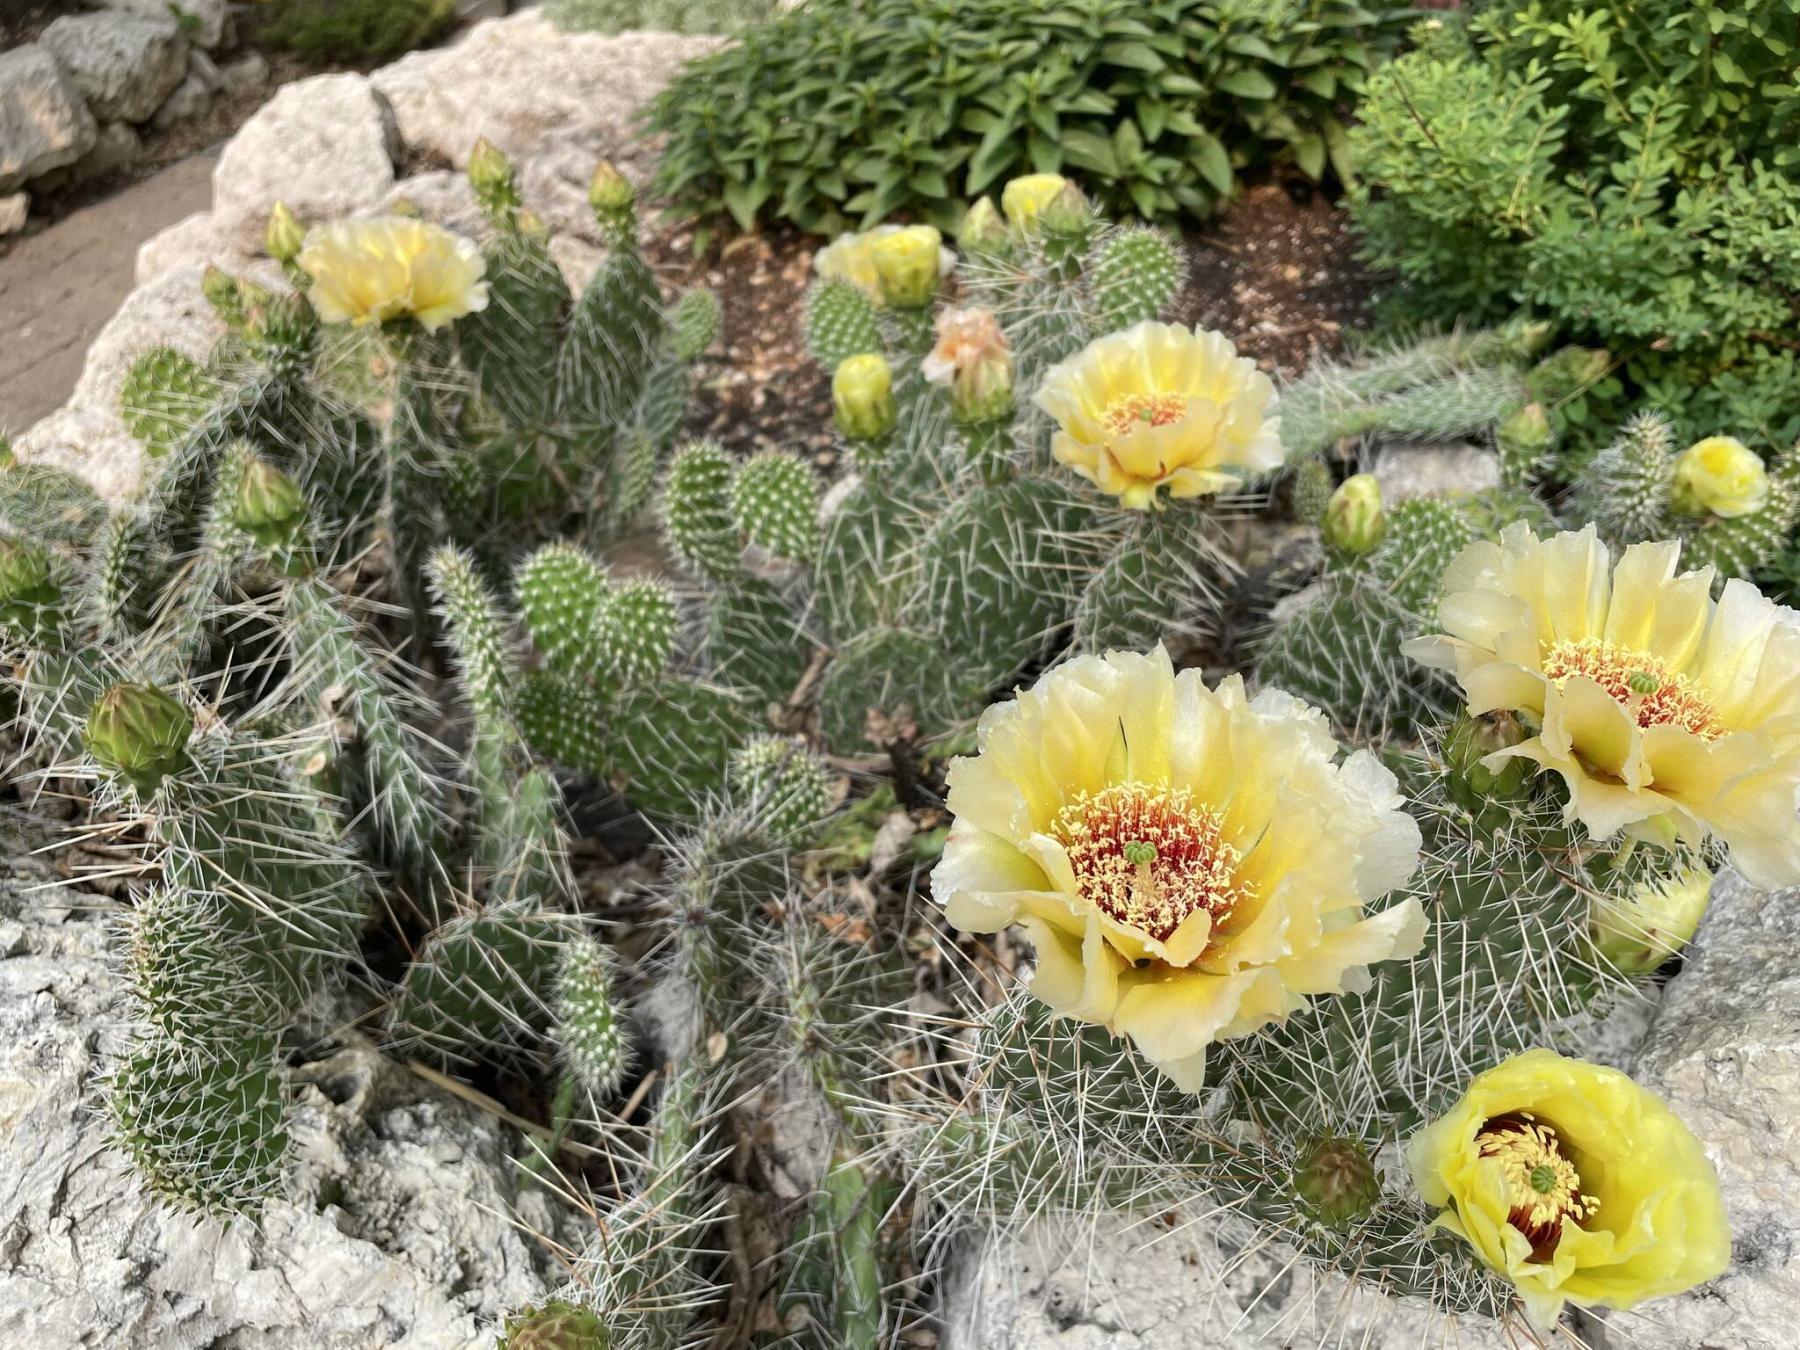  <p>Jessika Aiello</p>
                                <p>Prickly but hardy, Opuntia polyacantha has grown in the Aiello&rsquo;s Winnipeg Garden for many years.</p> 